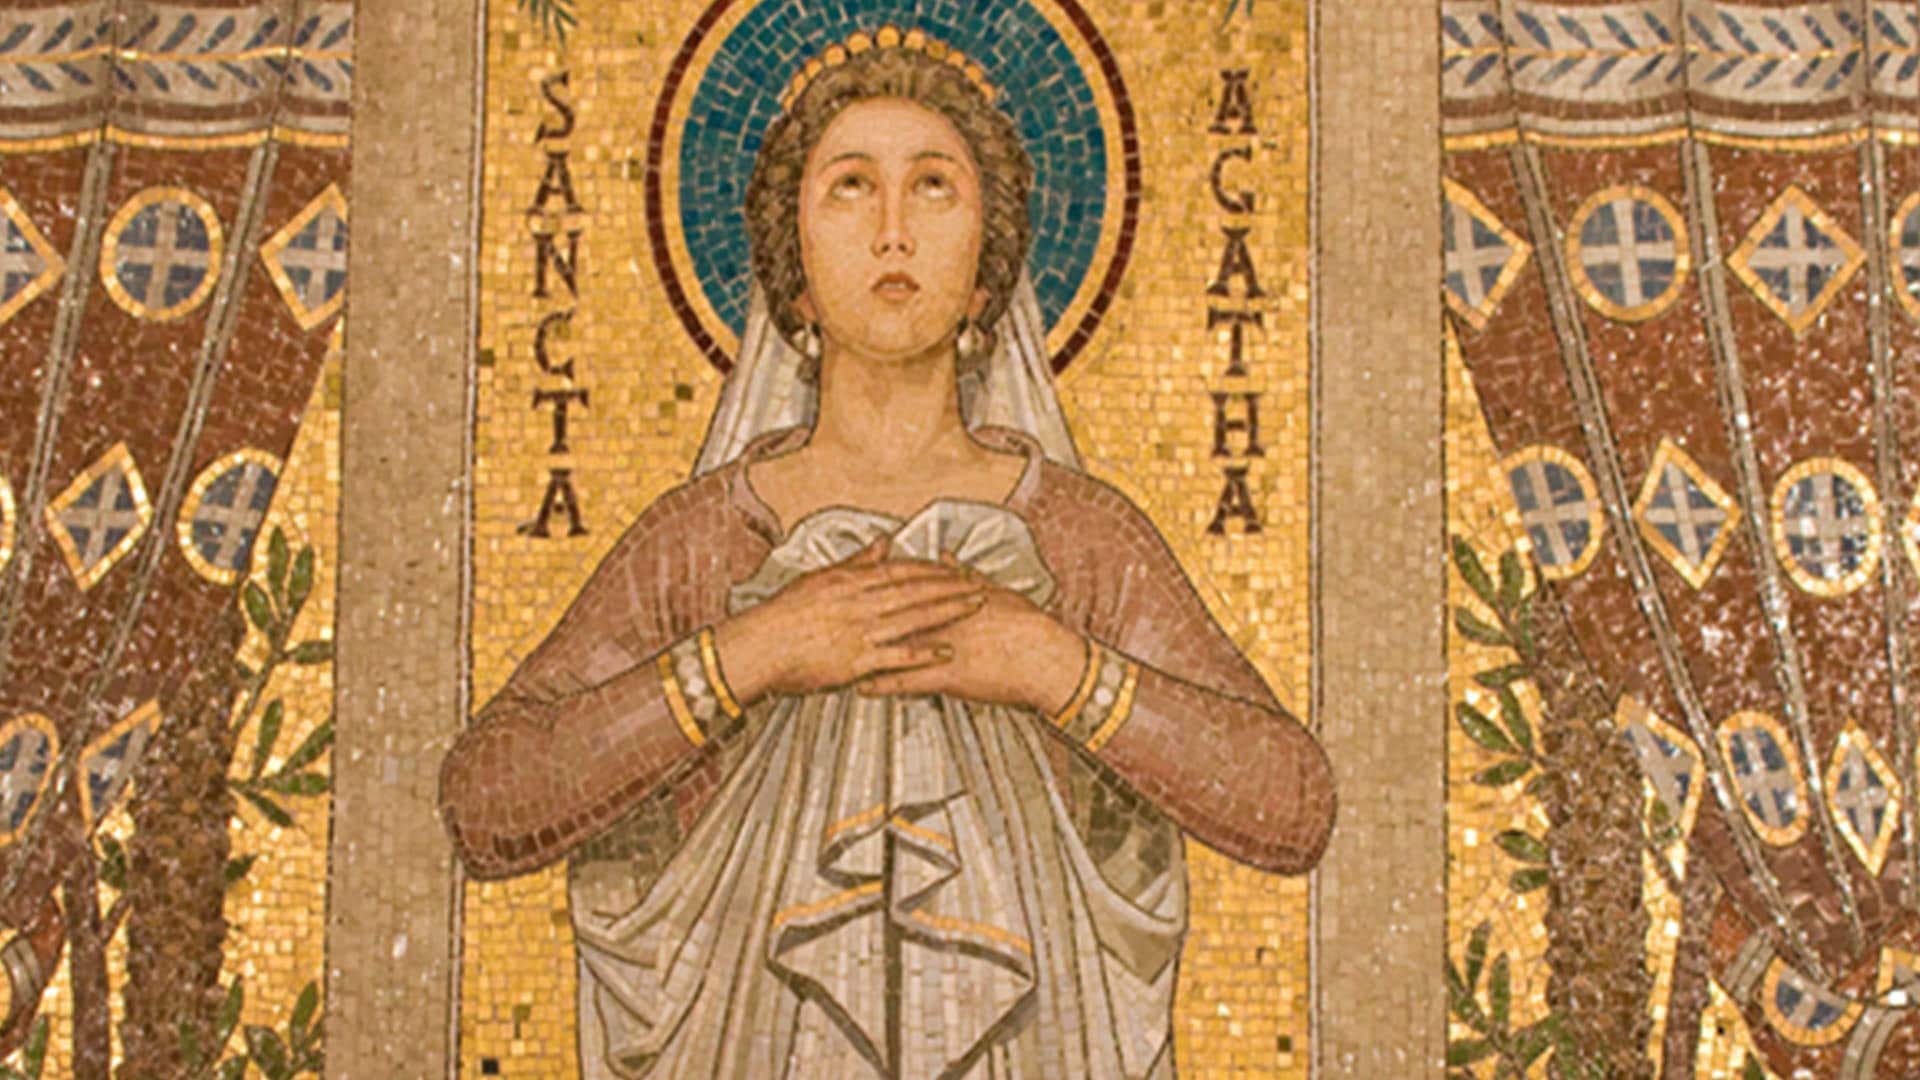 Wisdom Wednesday-Quantum Physics Cannot Explain God And Therefore Cannot Explain Our Universe & Saint Agatha's Heroic Virginity